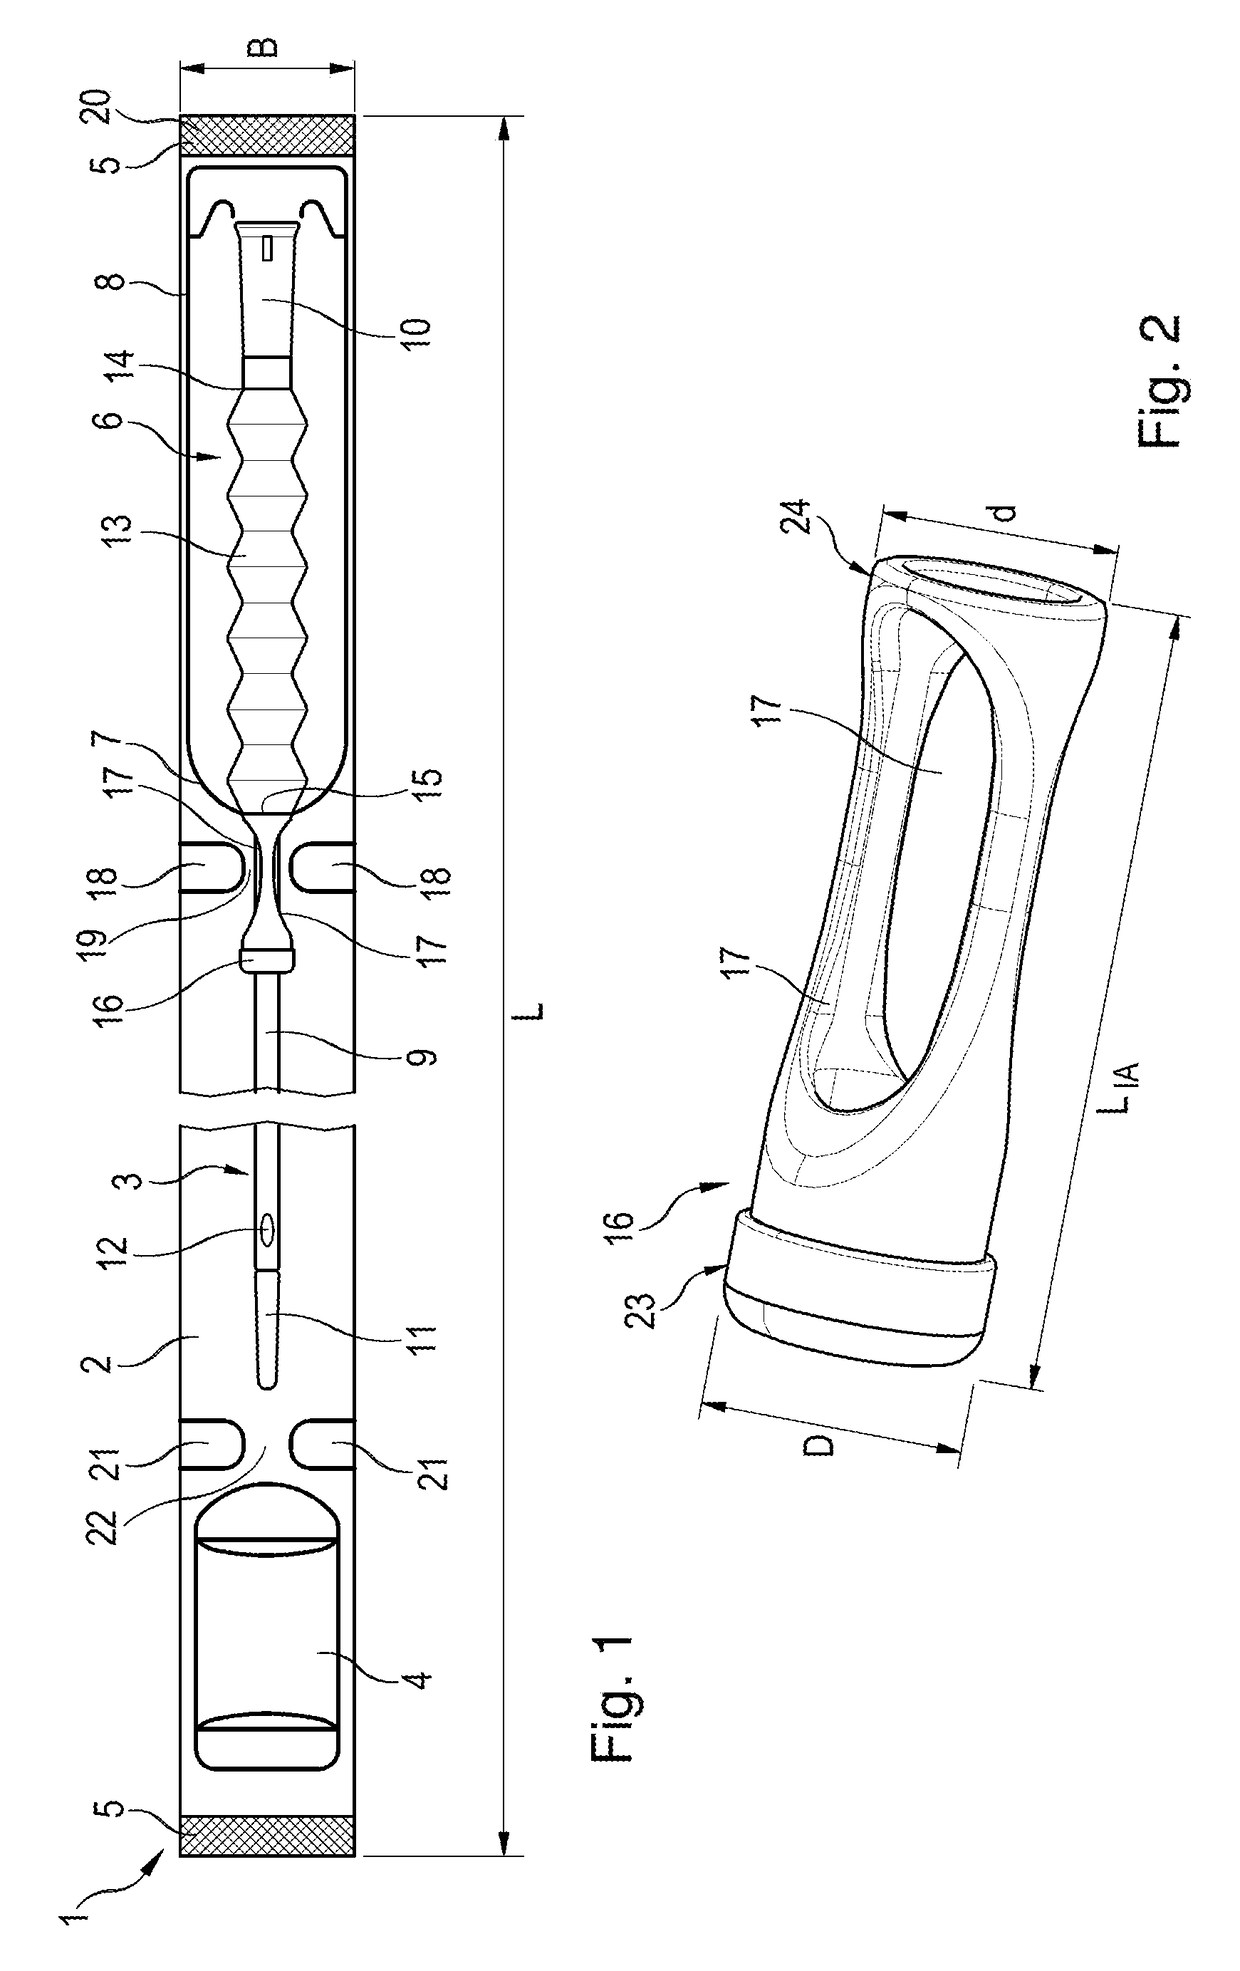 Ready to use catheter assembly and method of making a ready to use catheter assembly